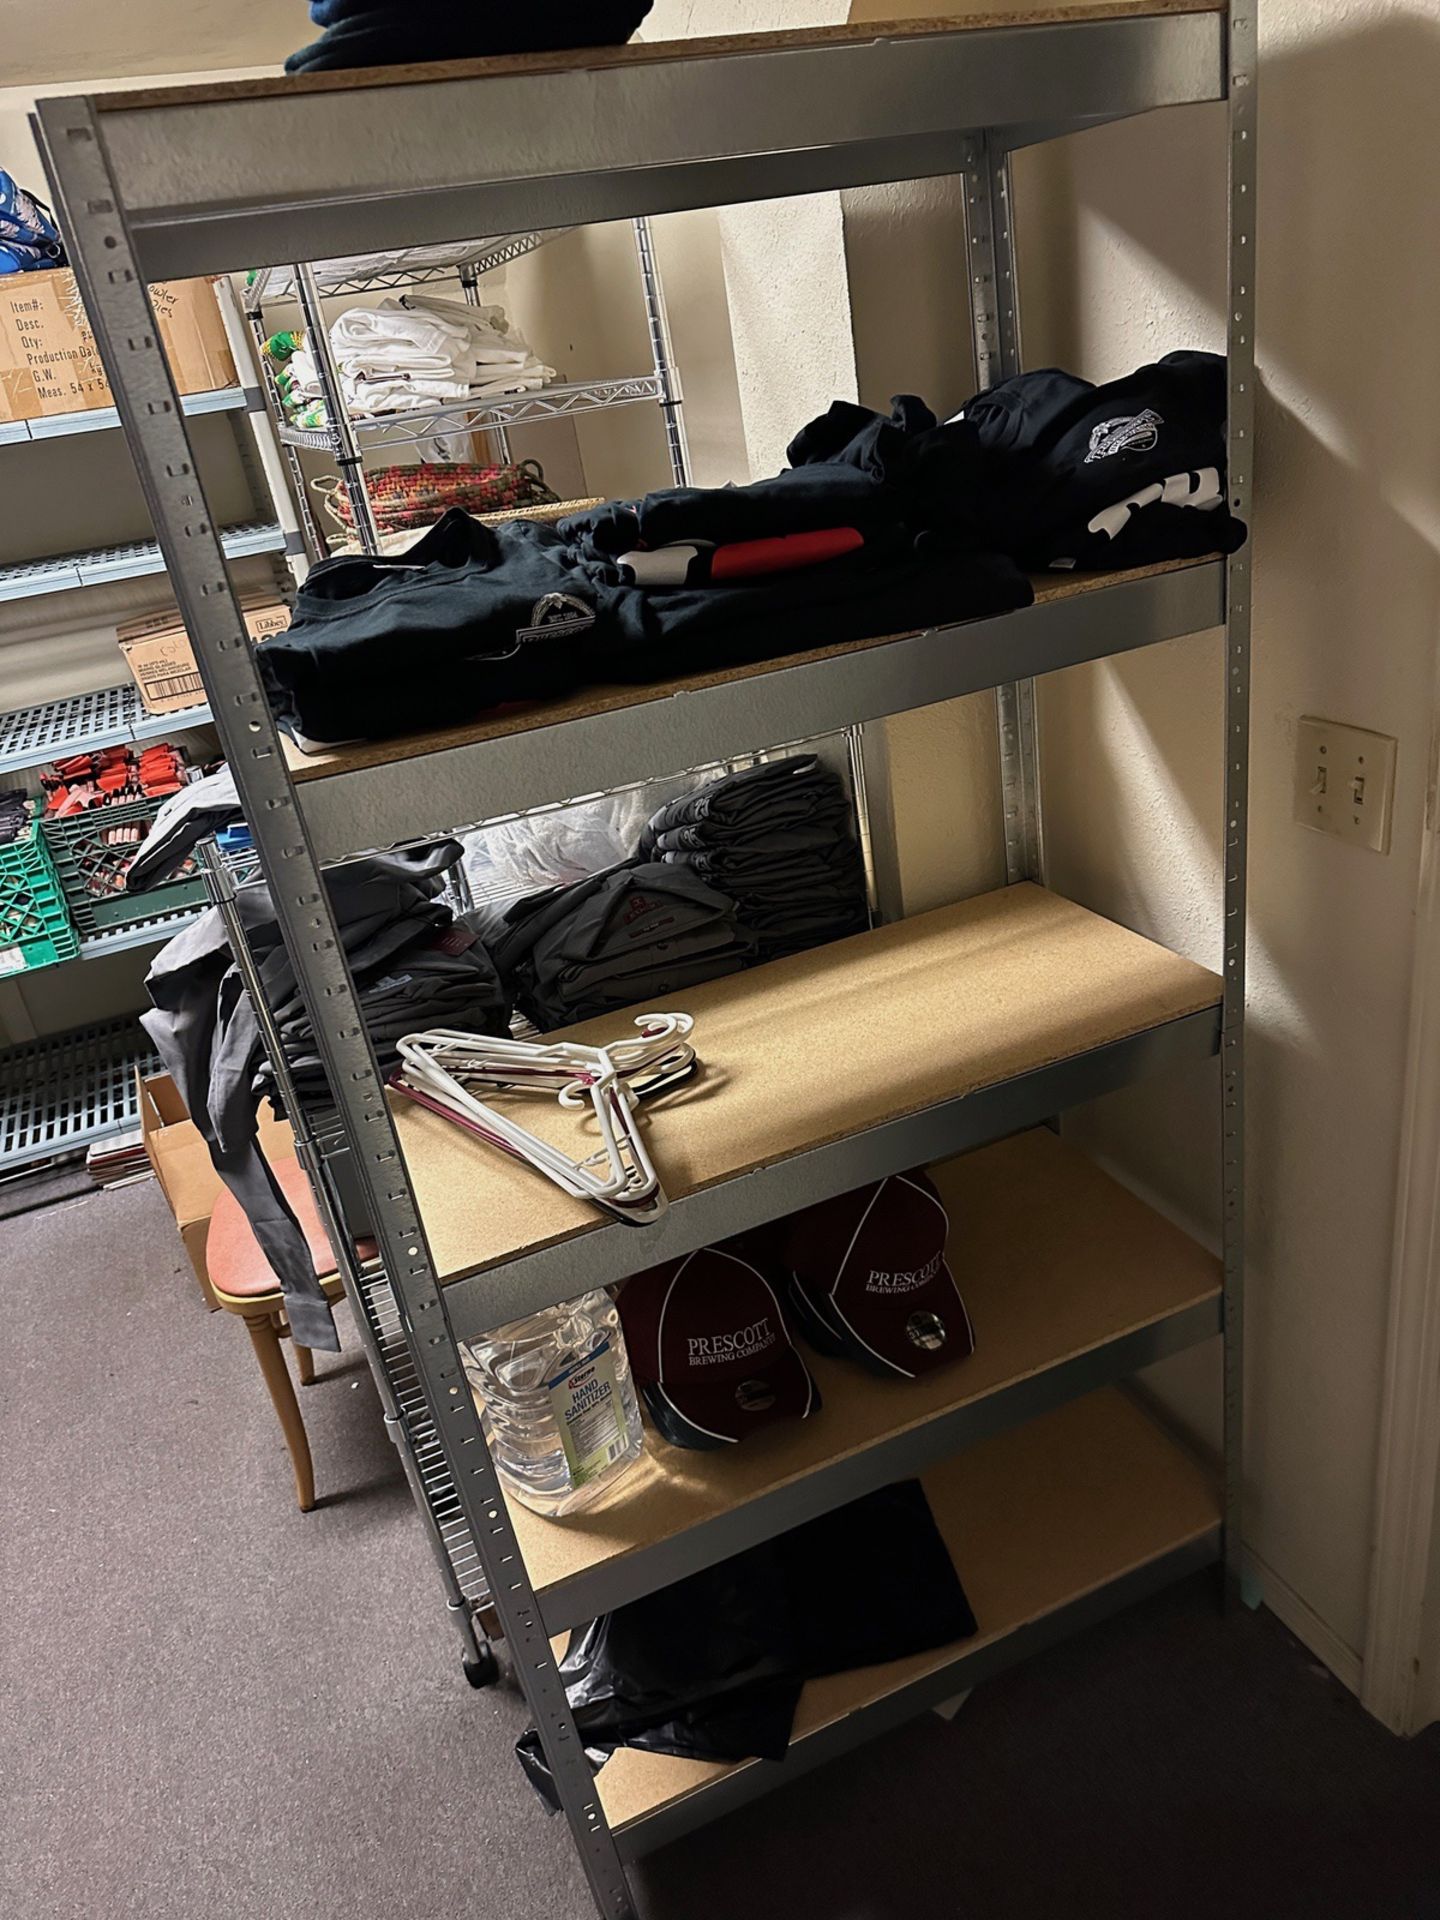 Lot of Contents of Merchandise Room - Including Shelving, Glassware, - Subj to Bulk | Rig Fee $125 - Image 8 of 8